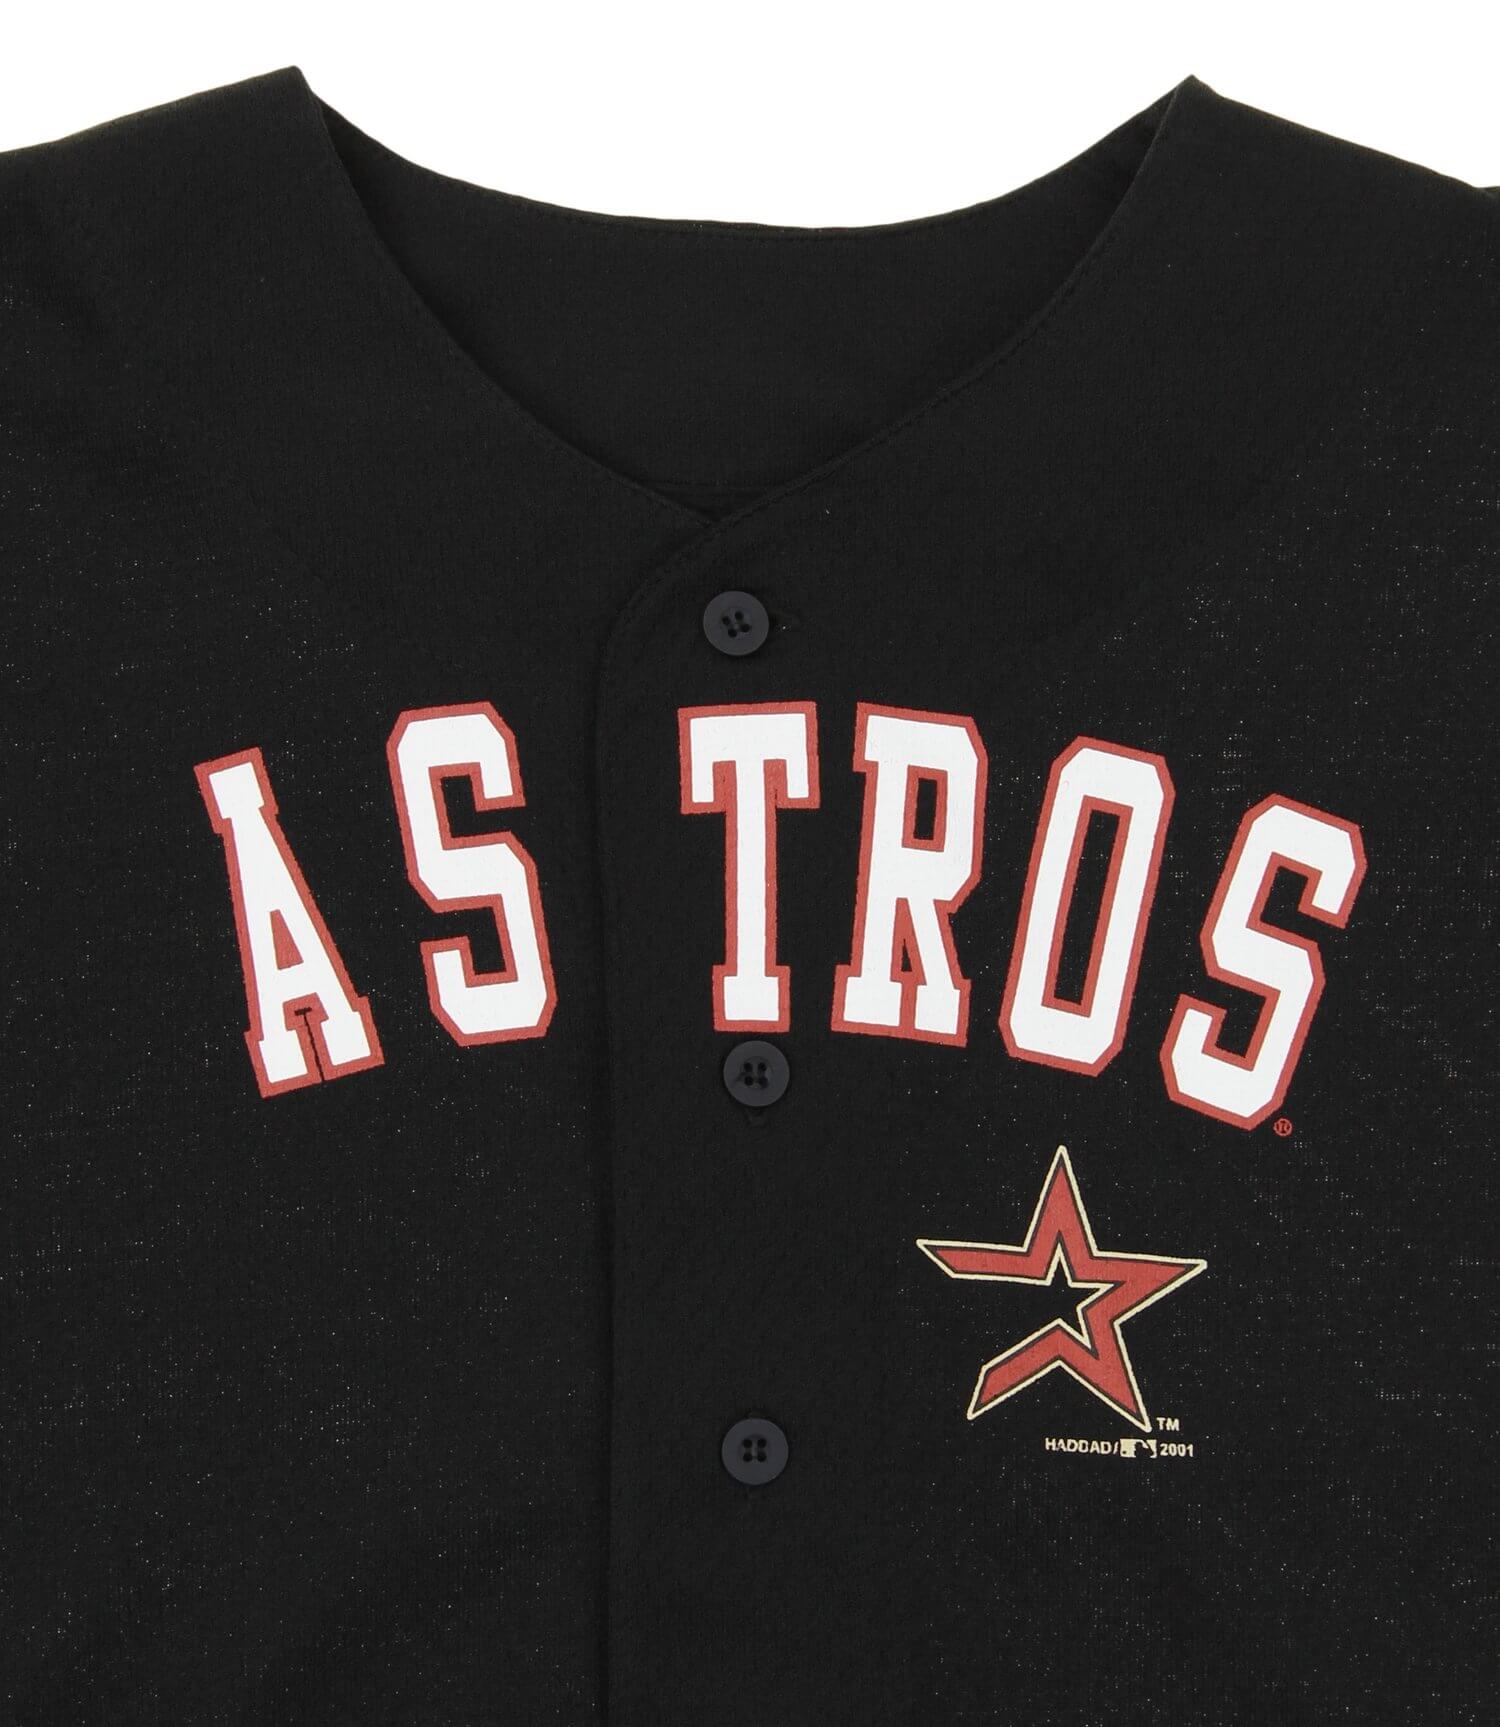 red astros jersey